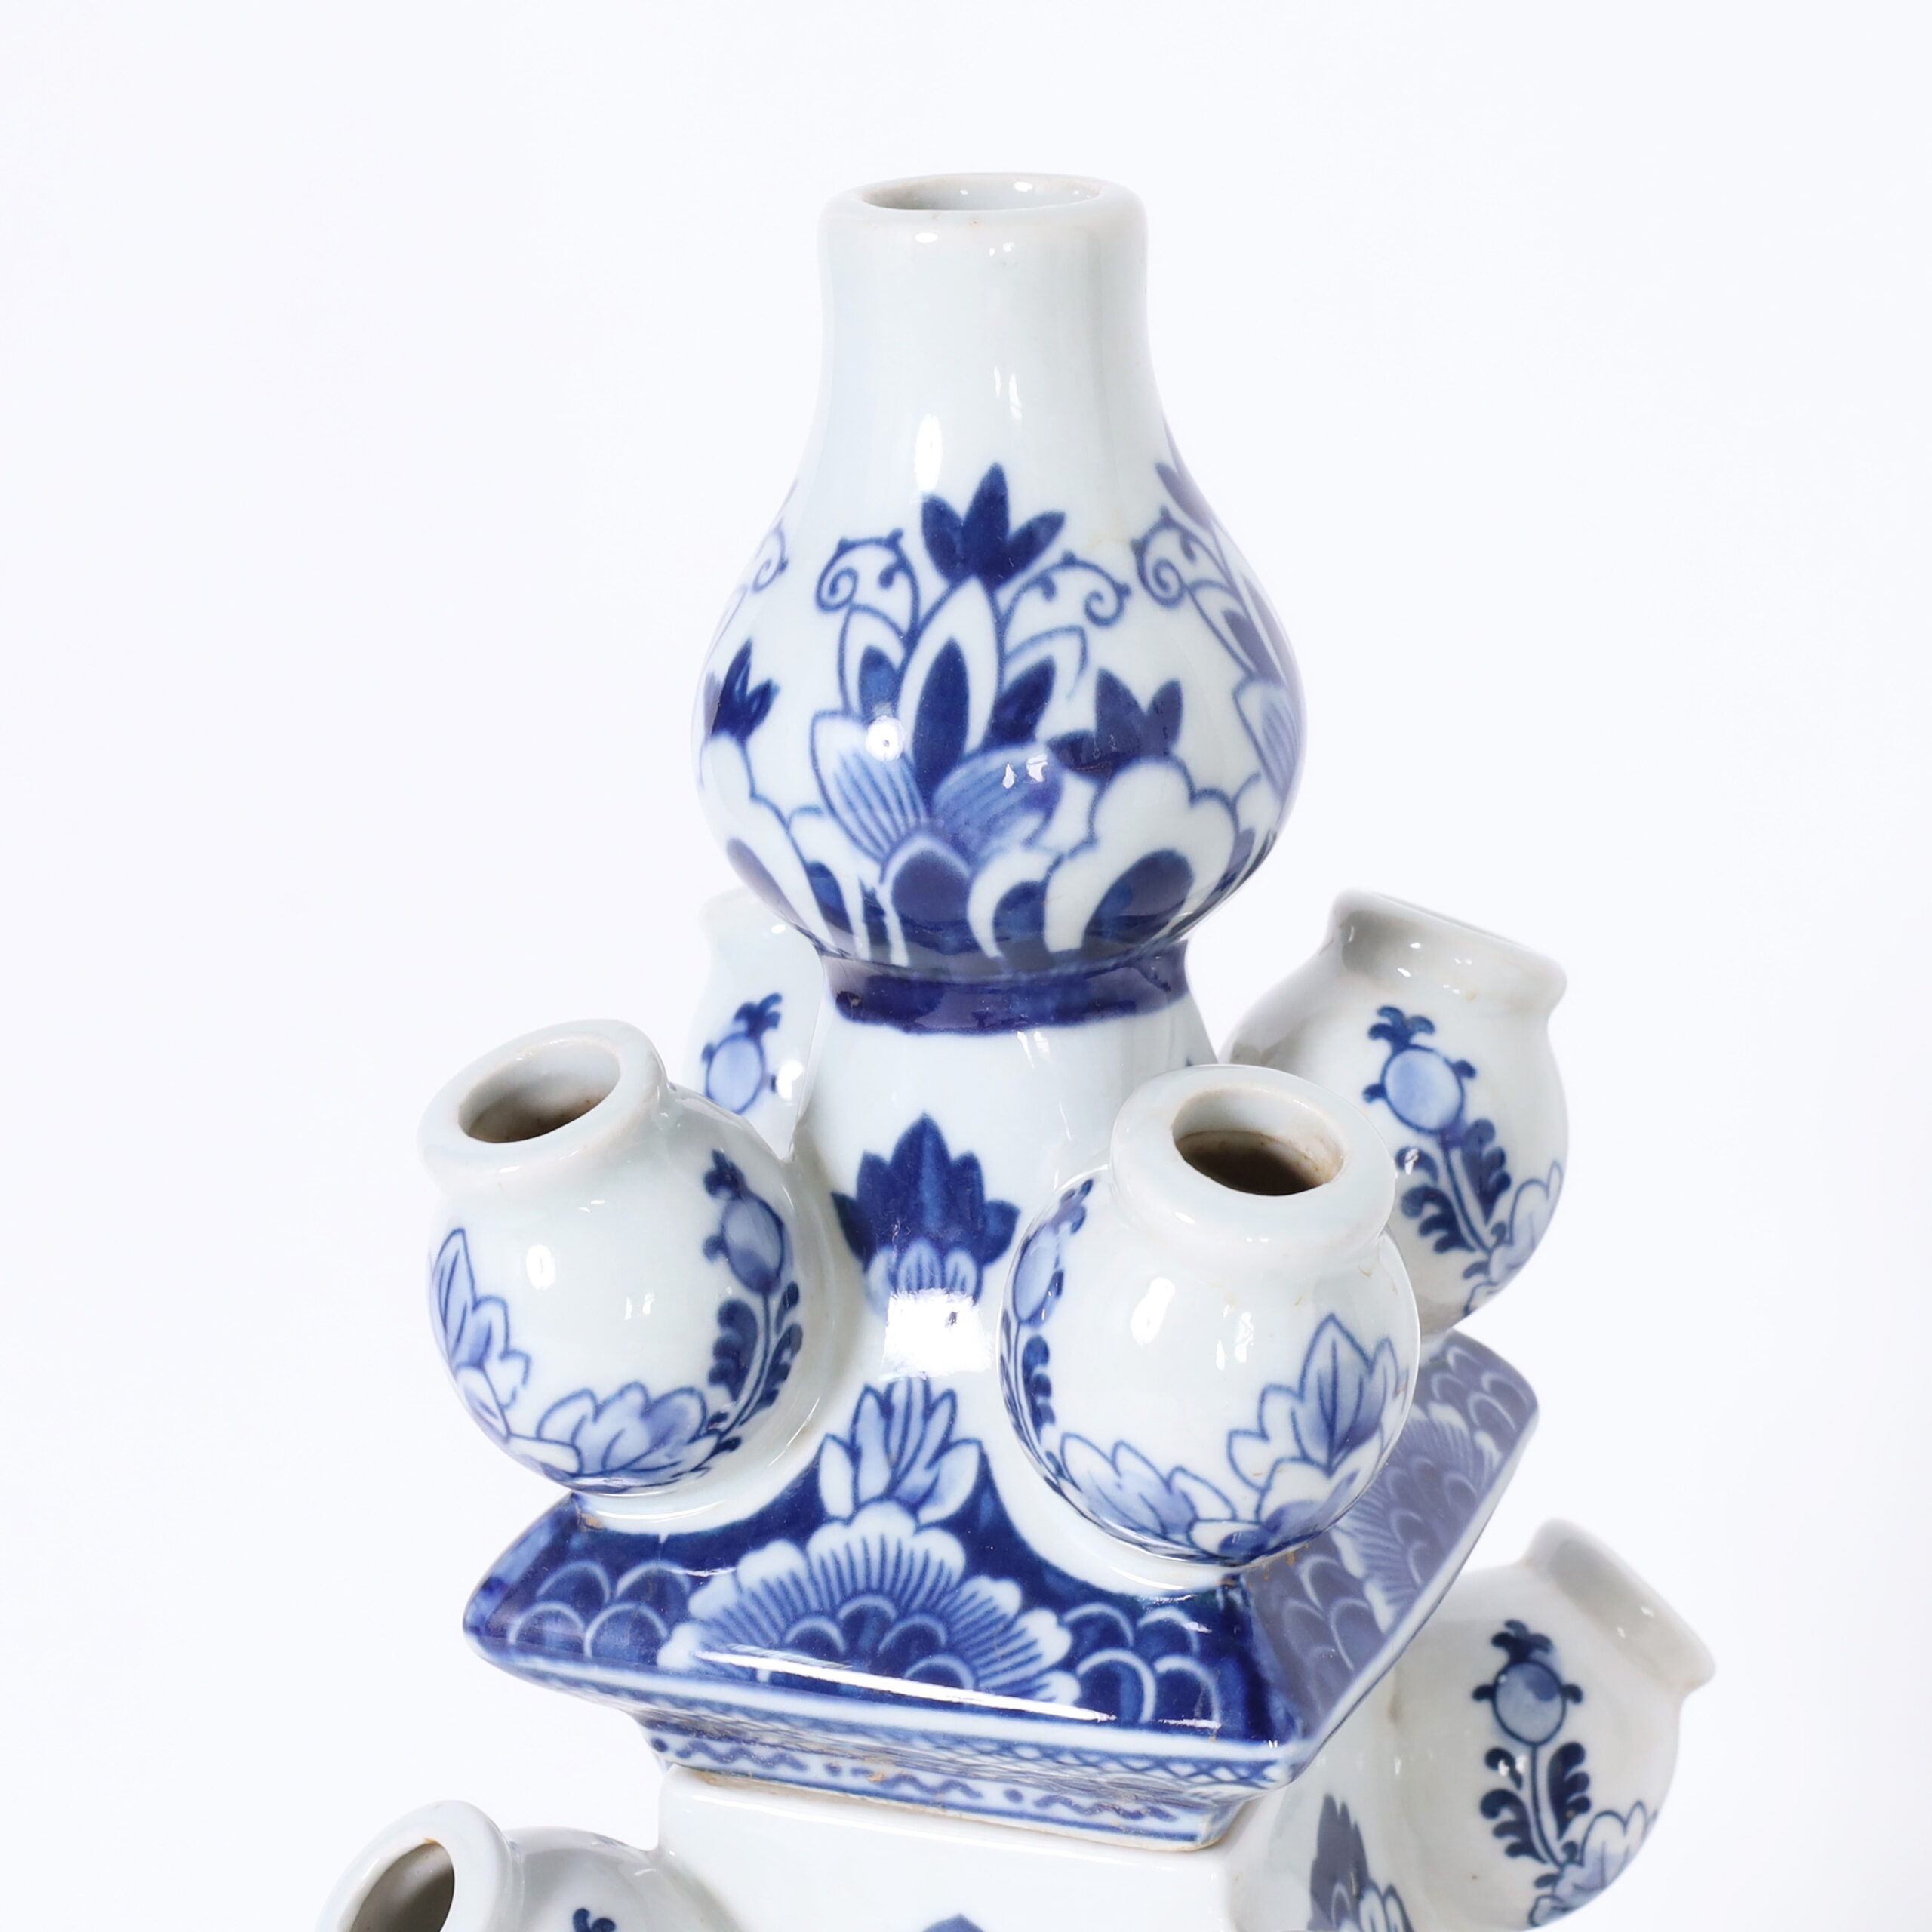 Pair of Chinese Blue and White Porcelain Tulipiere Towers